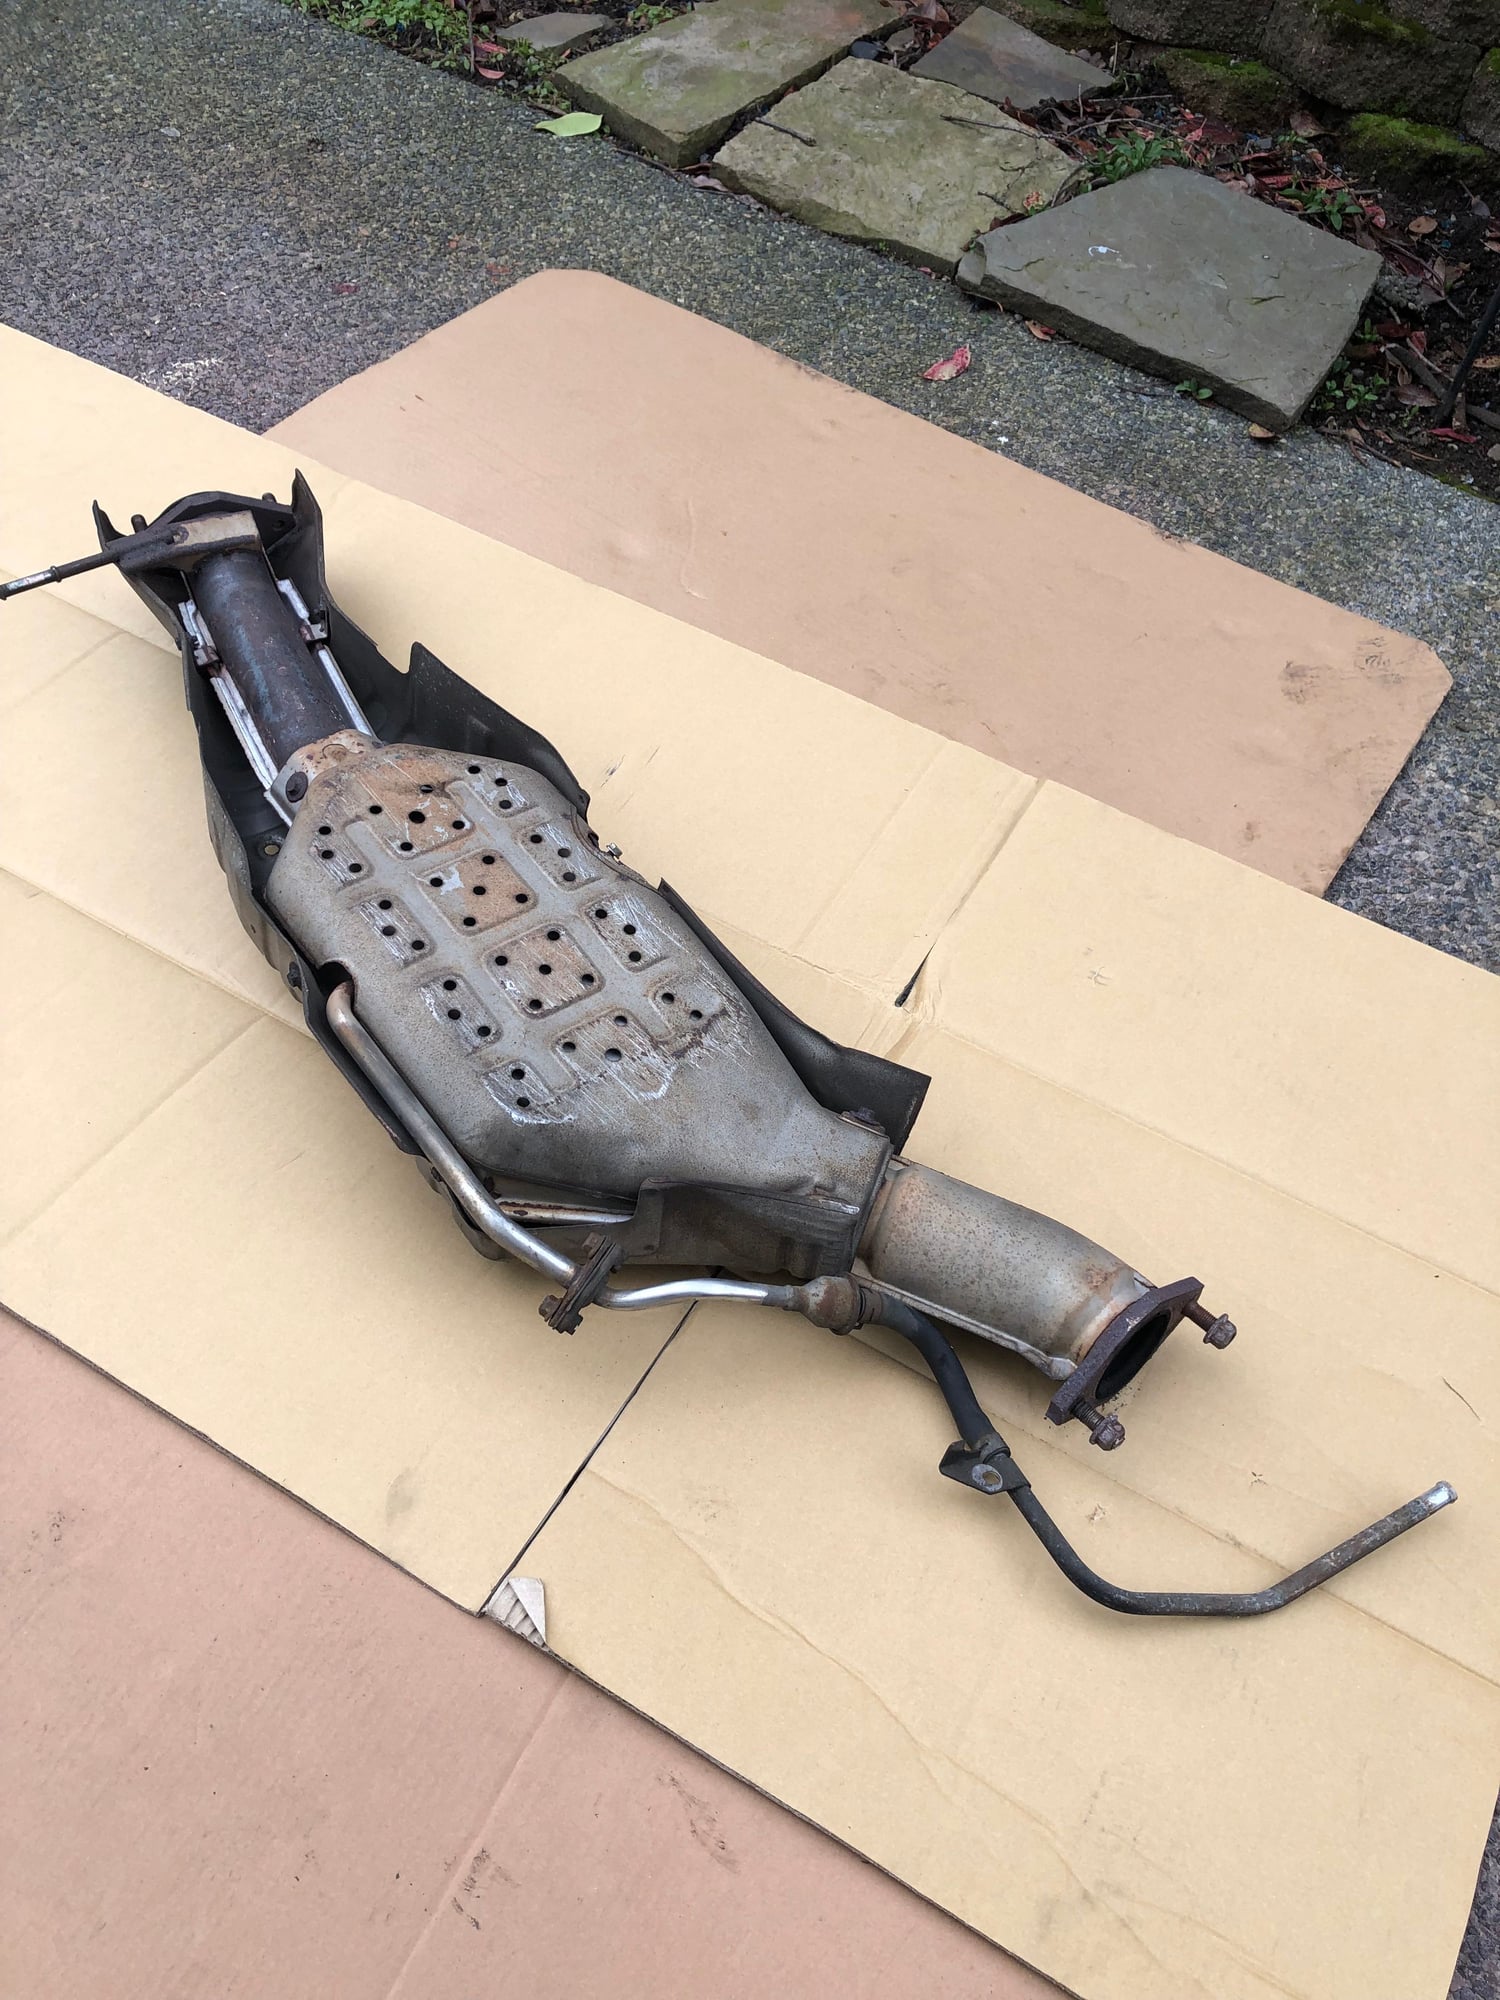 Engine - Exhaust - JDM FD3S OEM catalytic converter - Used - 1992 to 2002 Mazda RX-7 - Seattle, WA 98122, United States